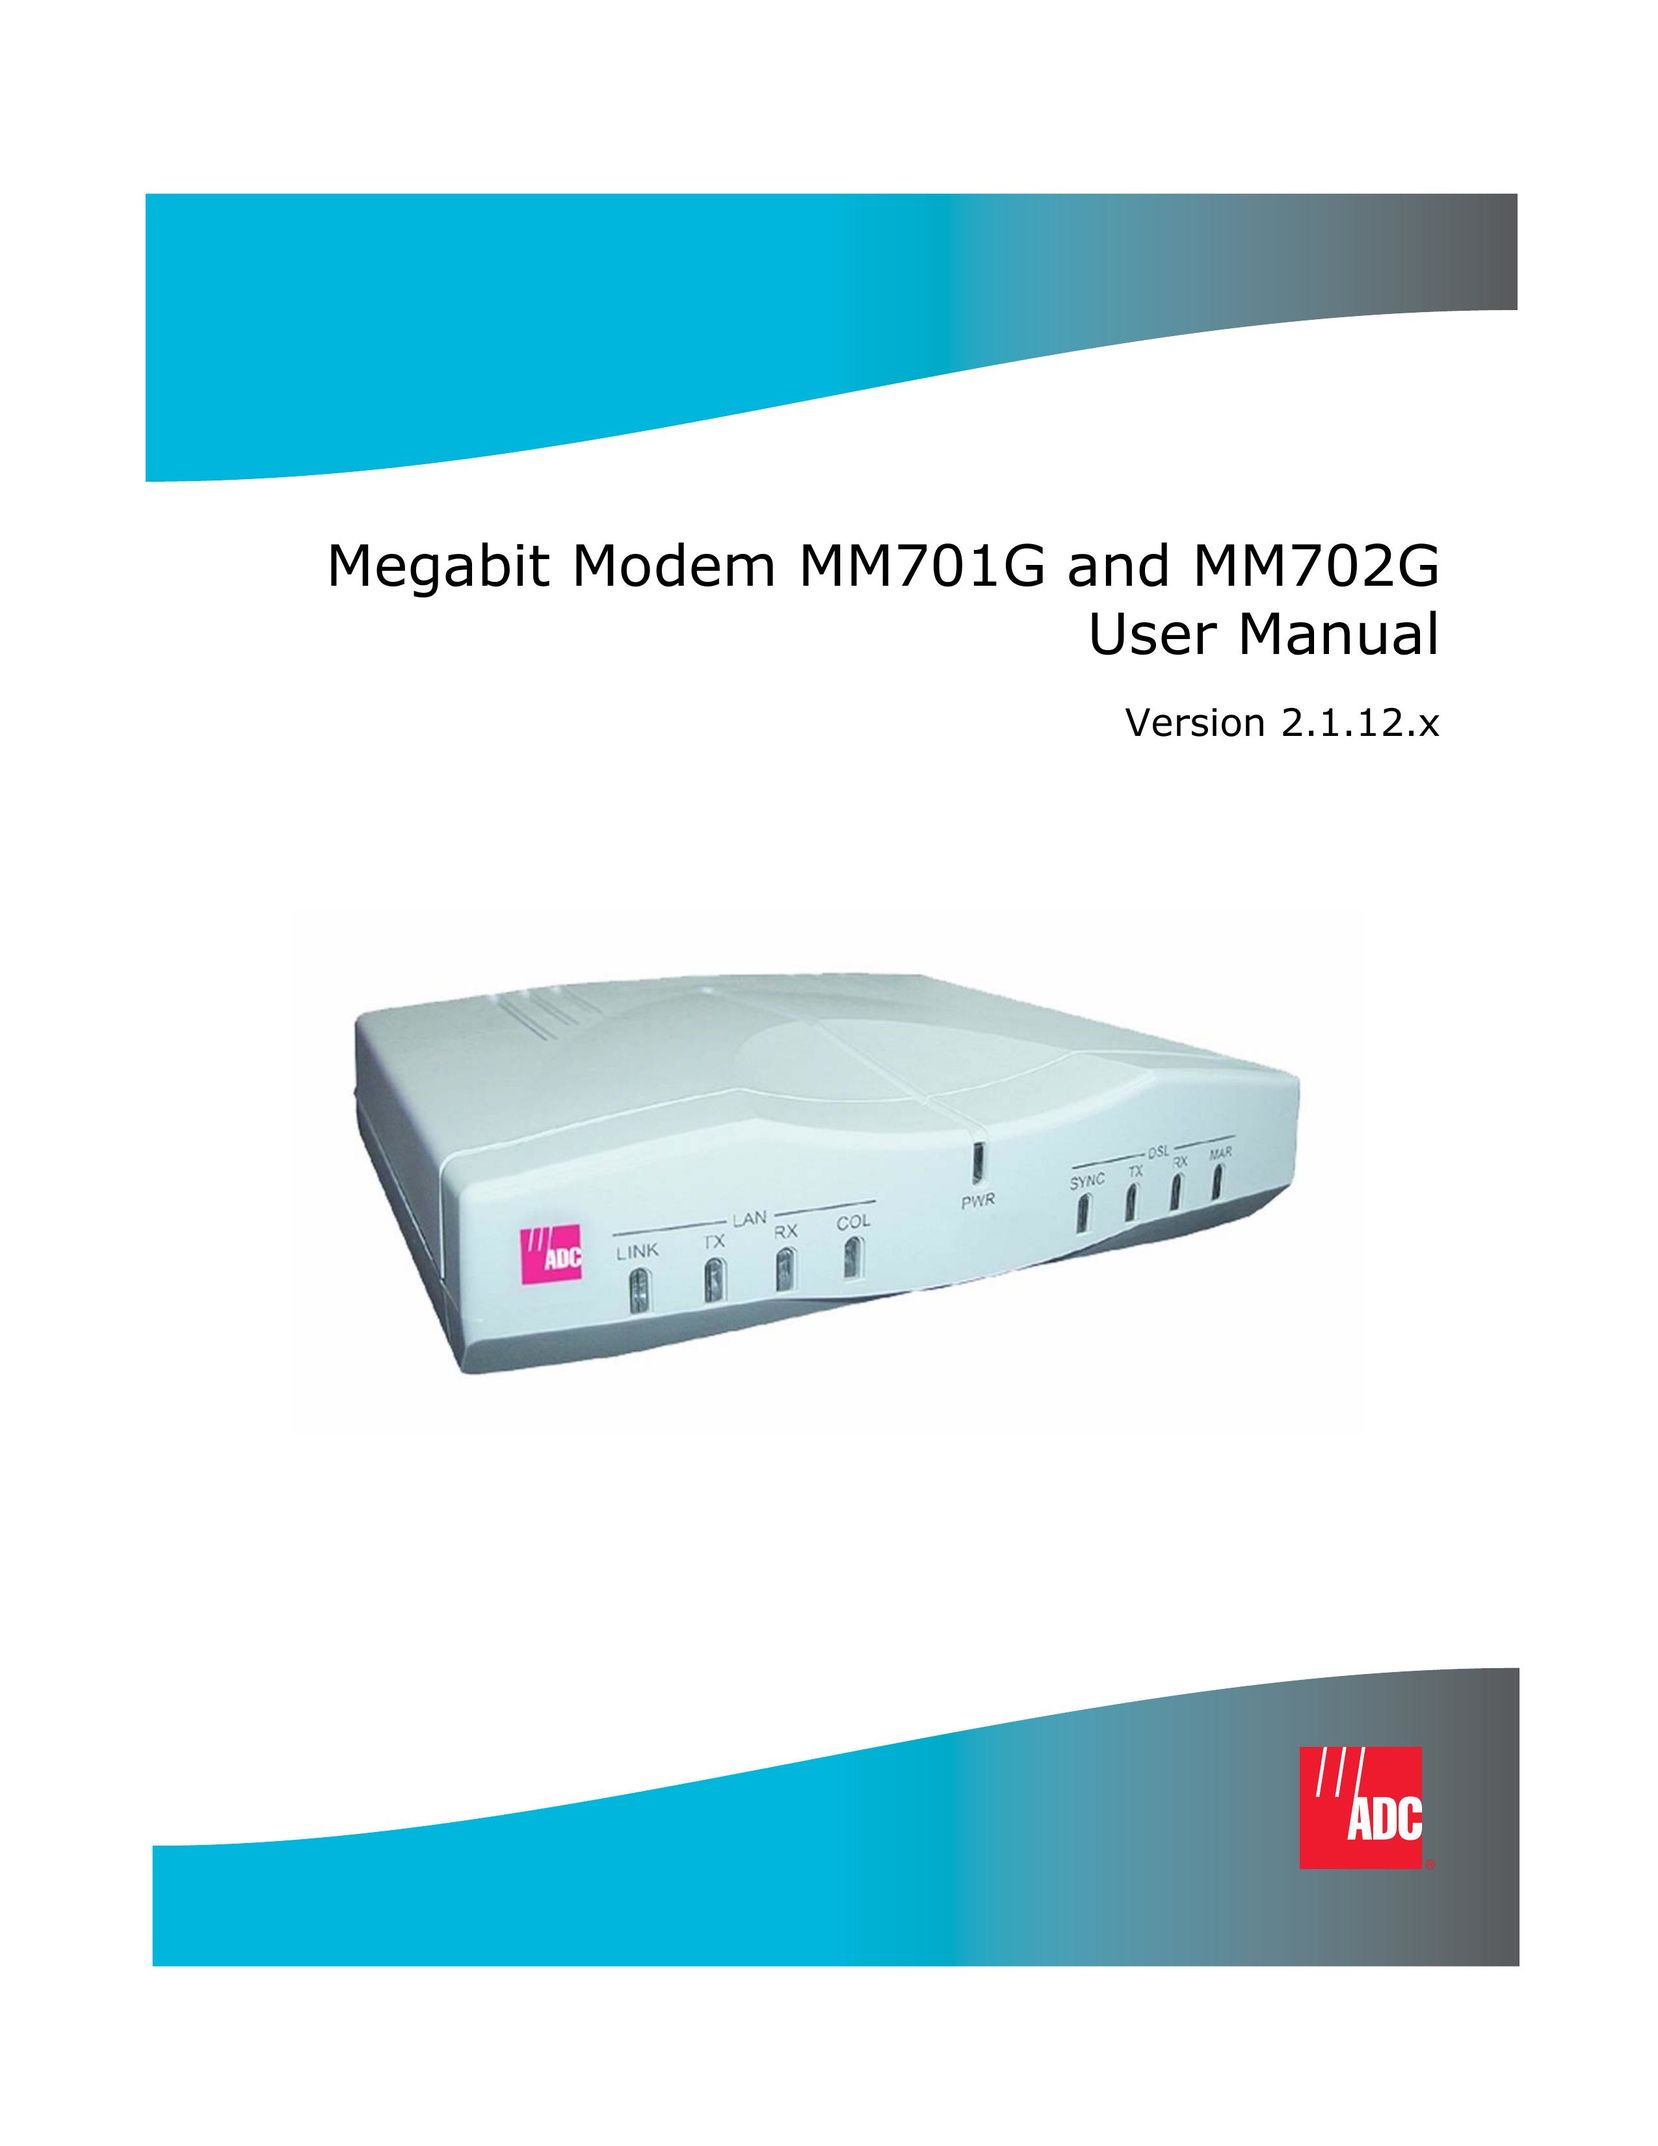 ADC MM701G Switch User Manual